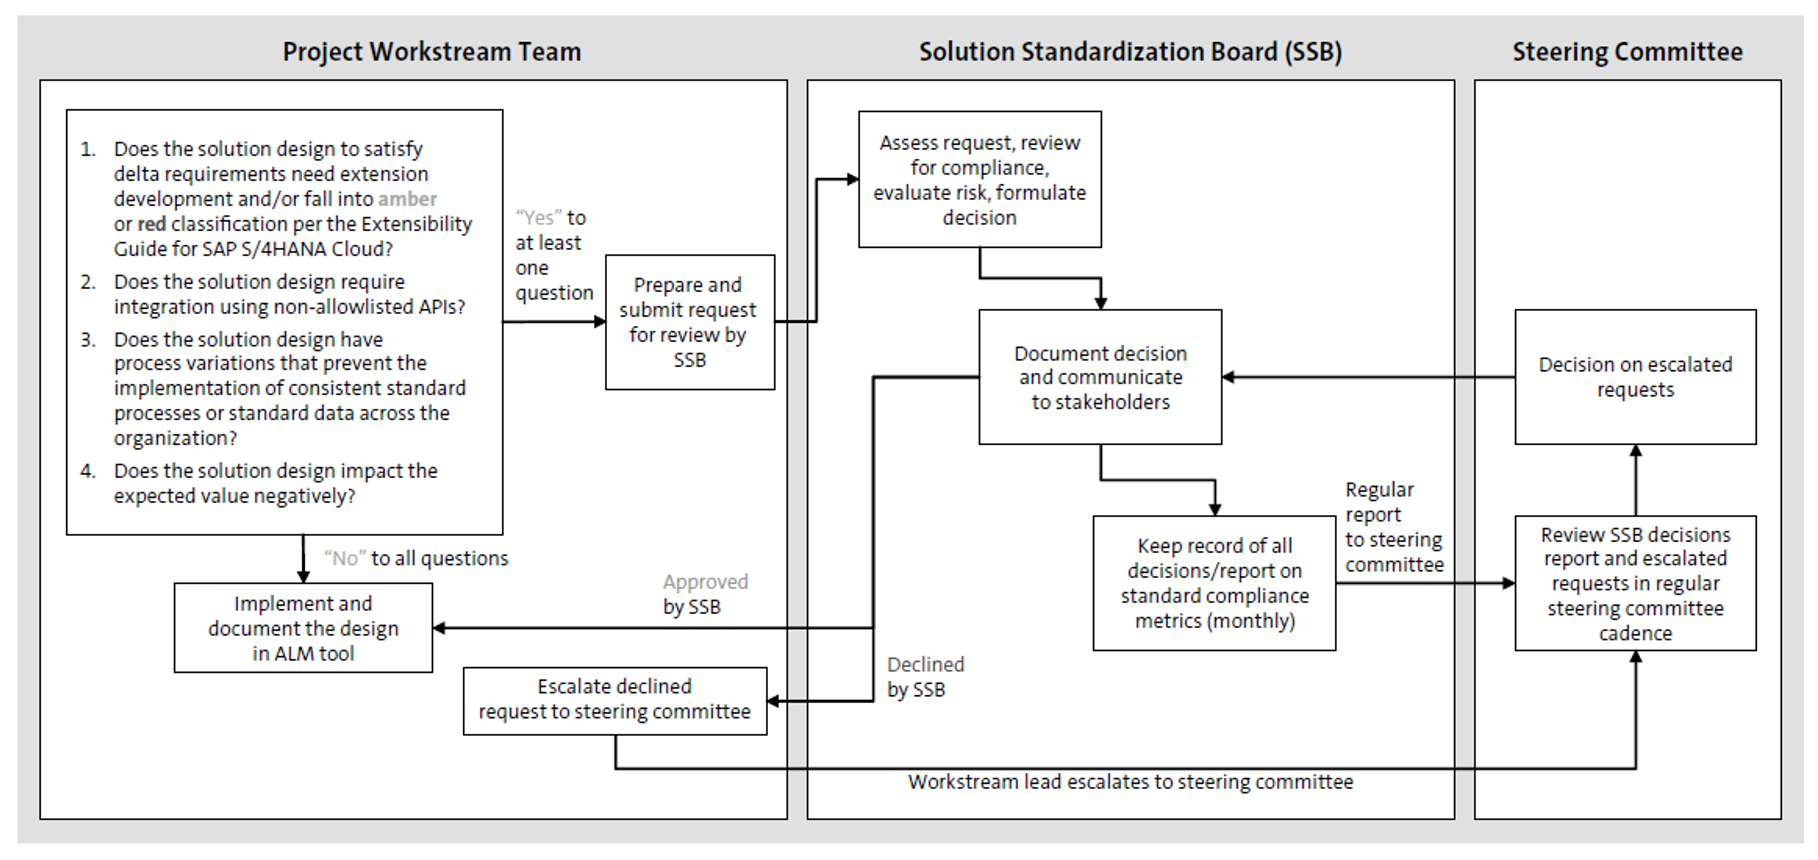 SSB Design Review Process to Ensure Compliance with Golden Rules